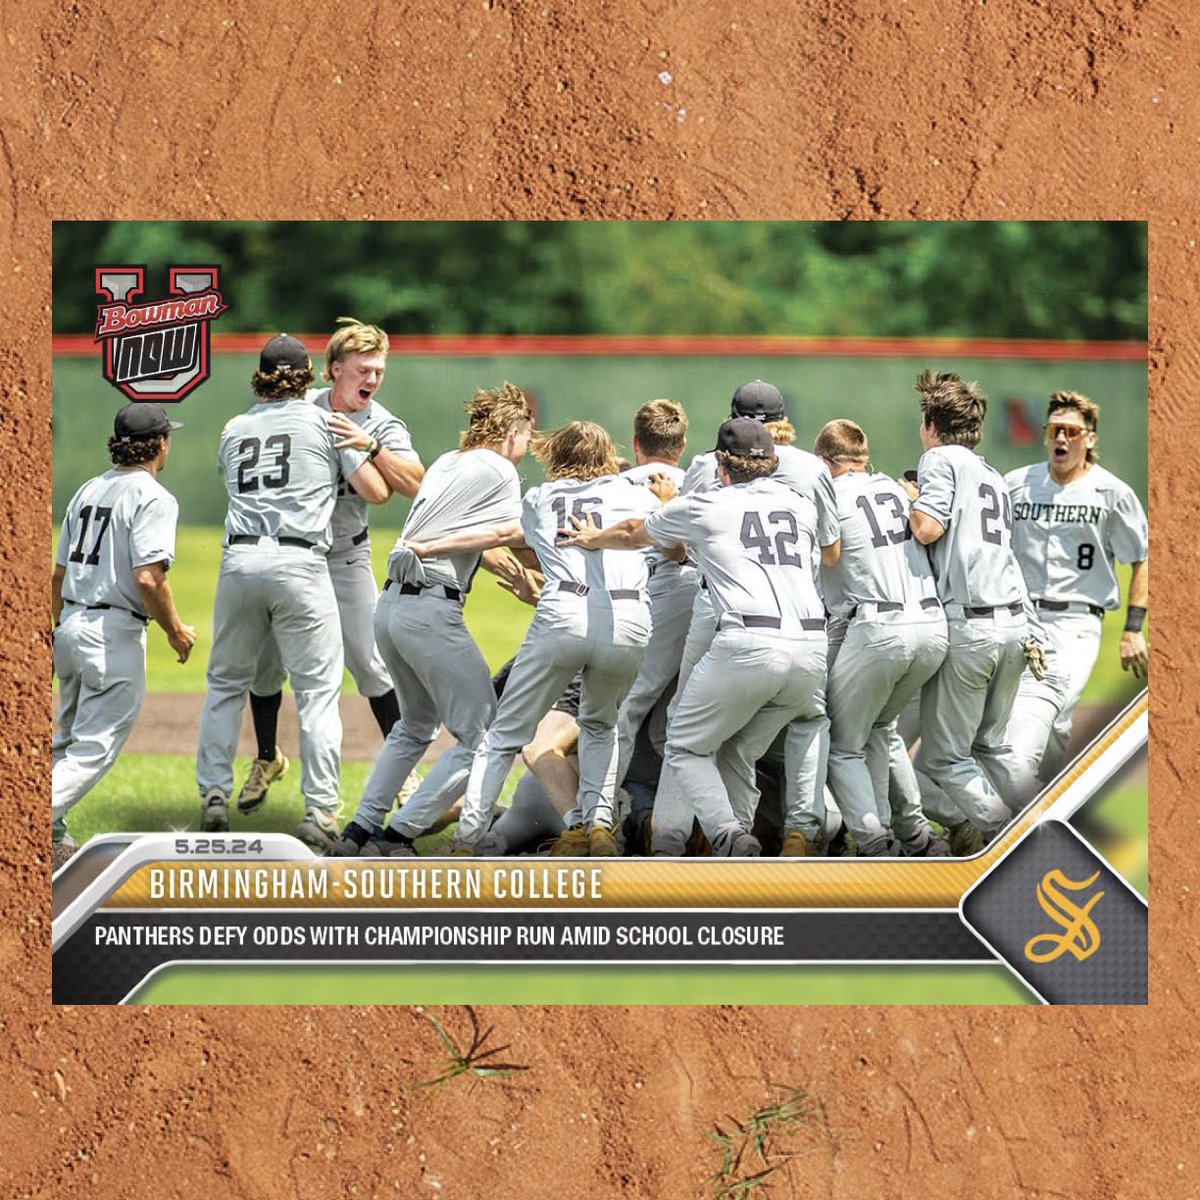 Topps is selling an official trading card of the Birmingham-Southern College baseball team. A portion of proceeds will be given to the program, which has reached the D-III College World Series despite the school closing on Friday. The cards are $8.99 each.